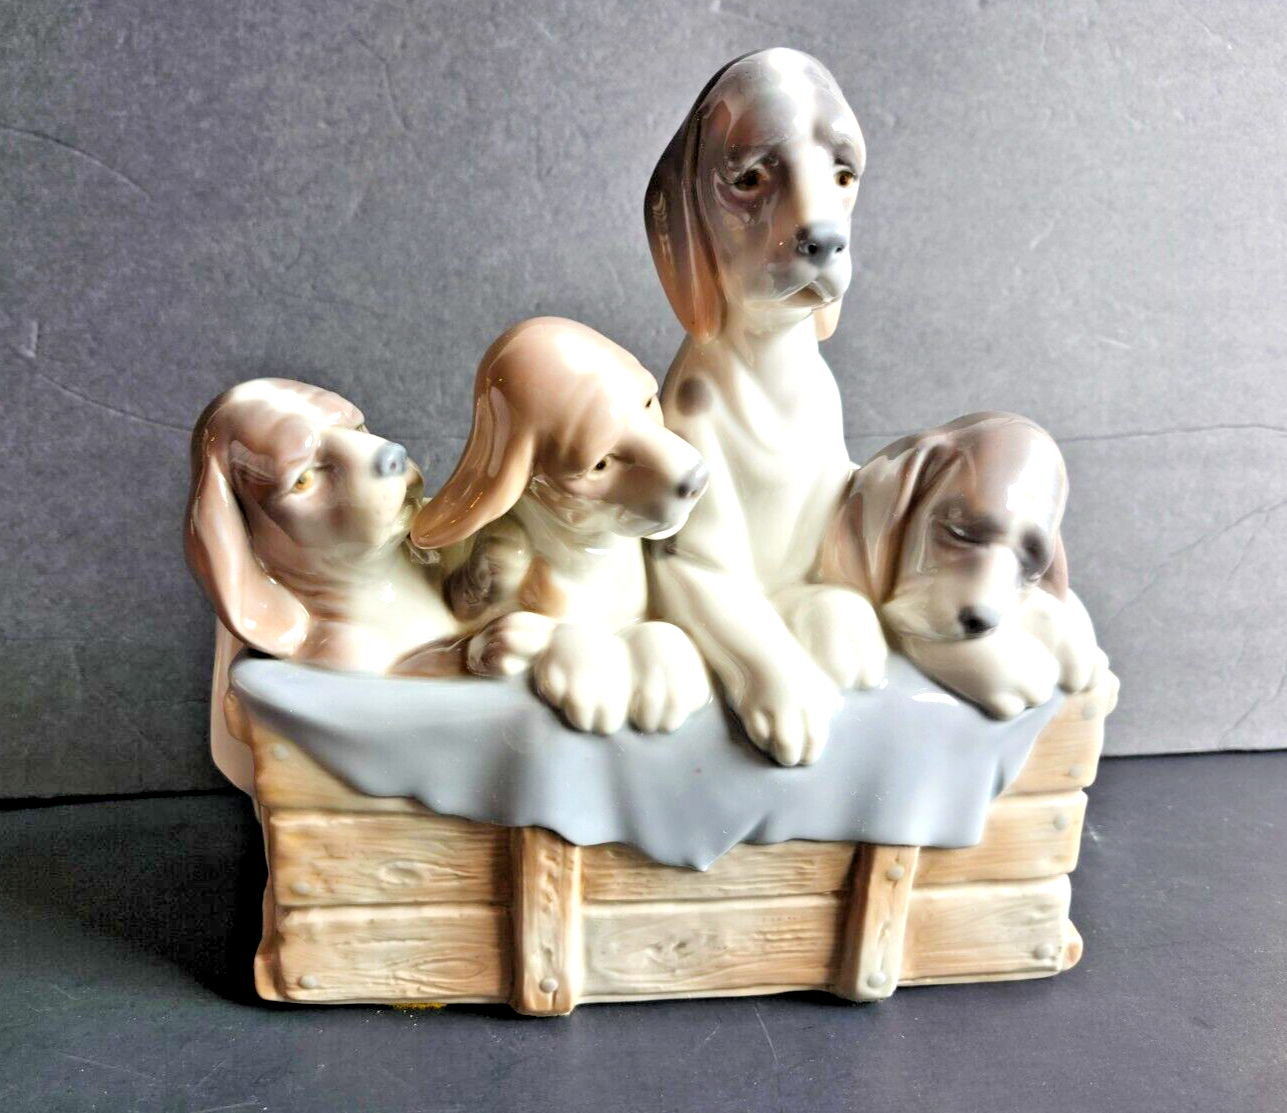 Vintage Lladro Four Beagle Puppies Dogs In Basket With Blanket # 0131 Retired - $355.41